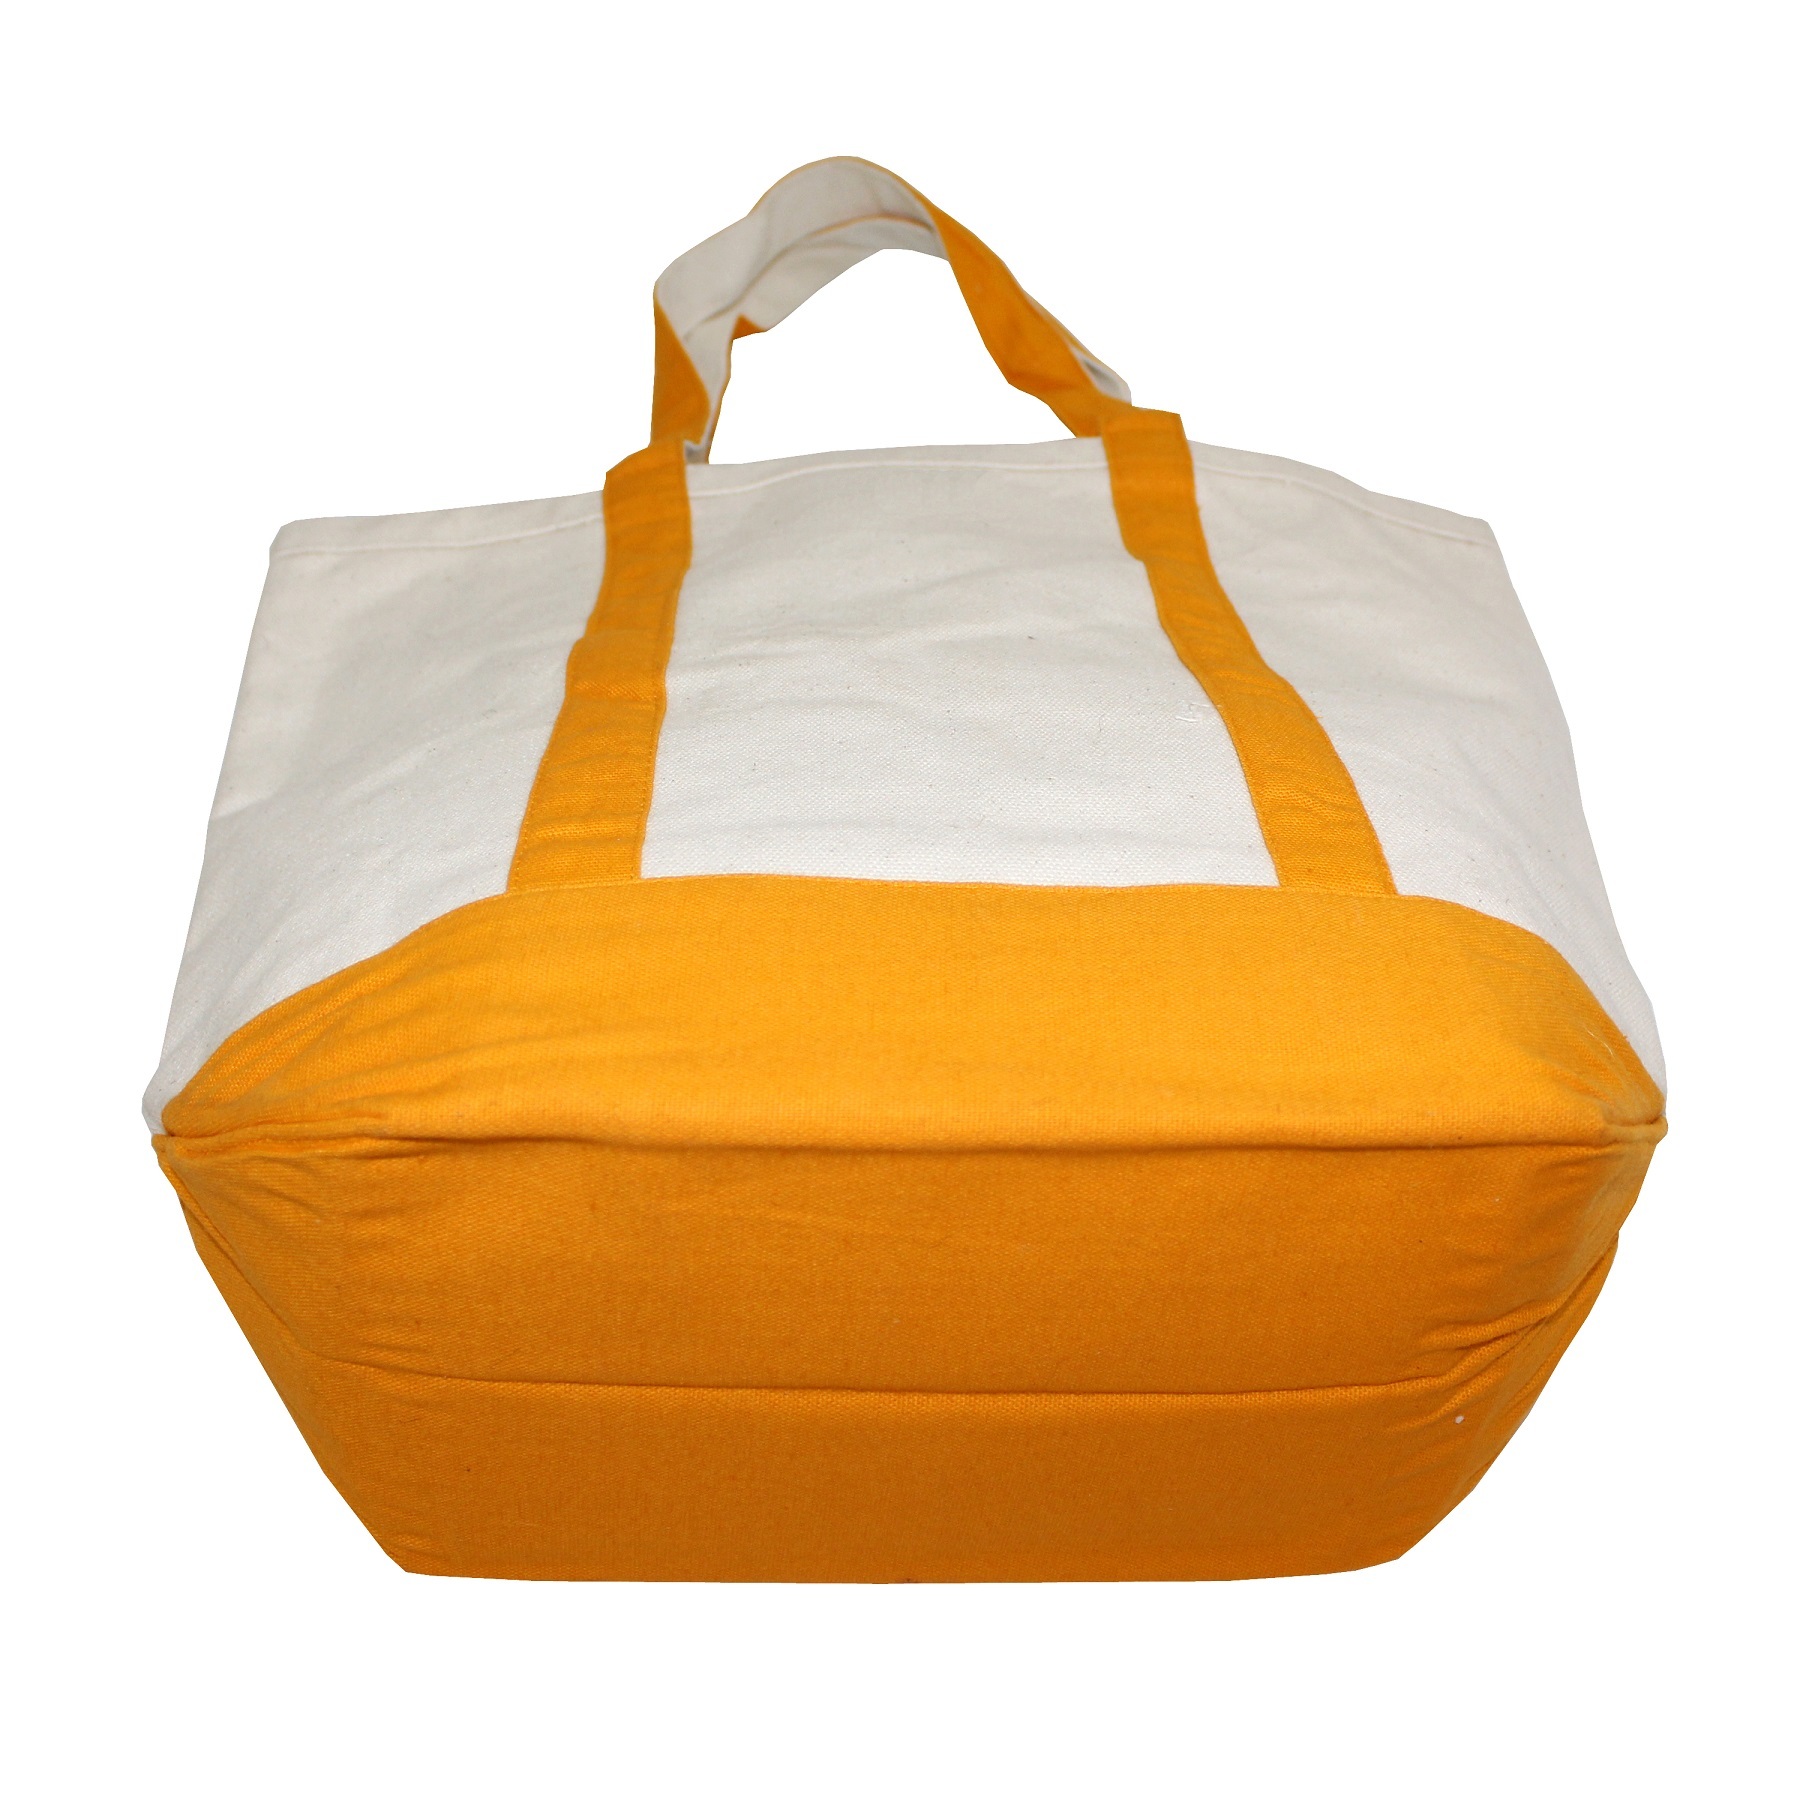 Canvas Boat Bag With Handle